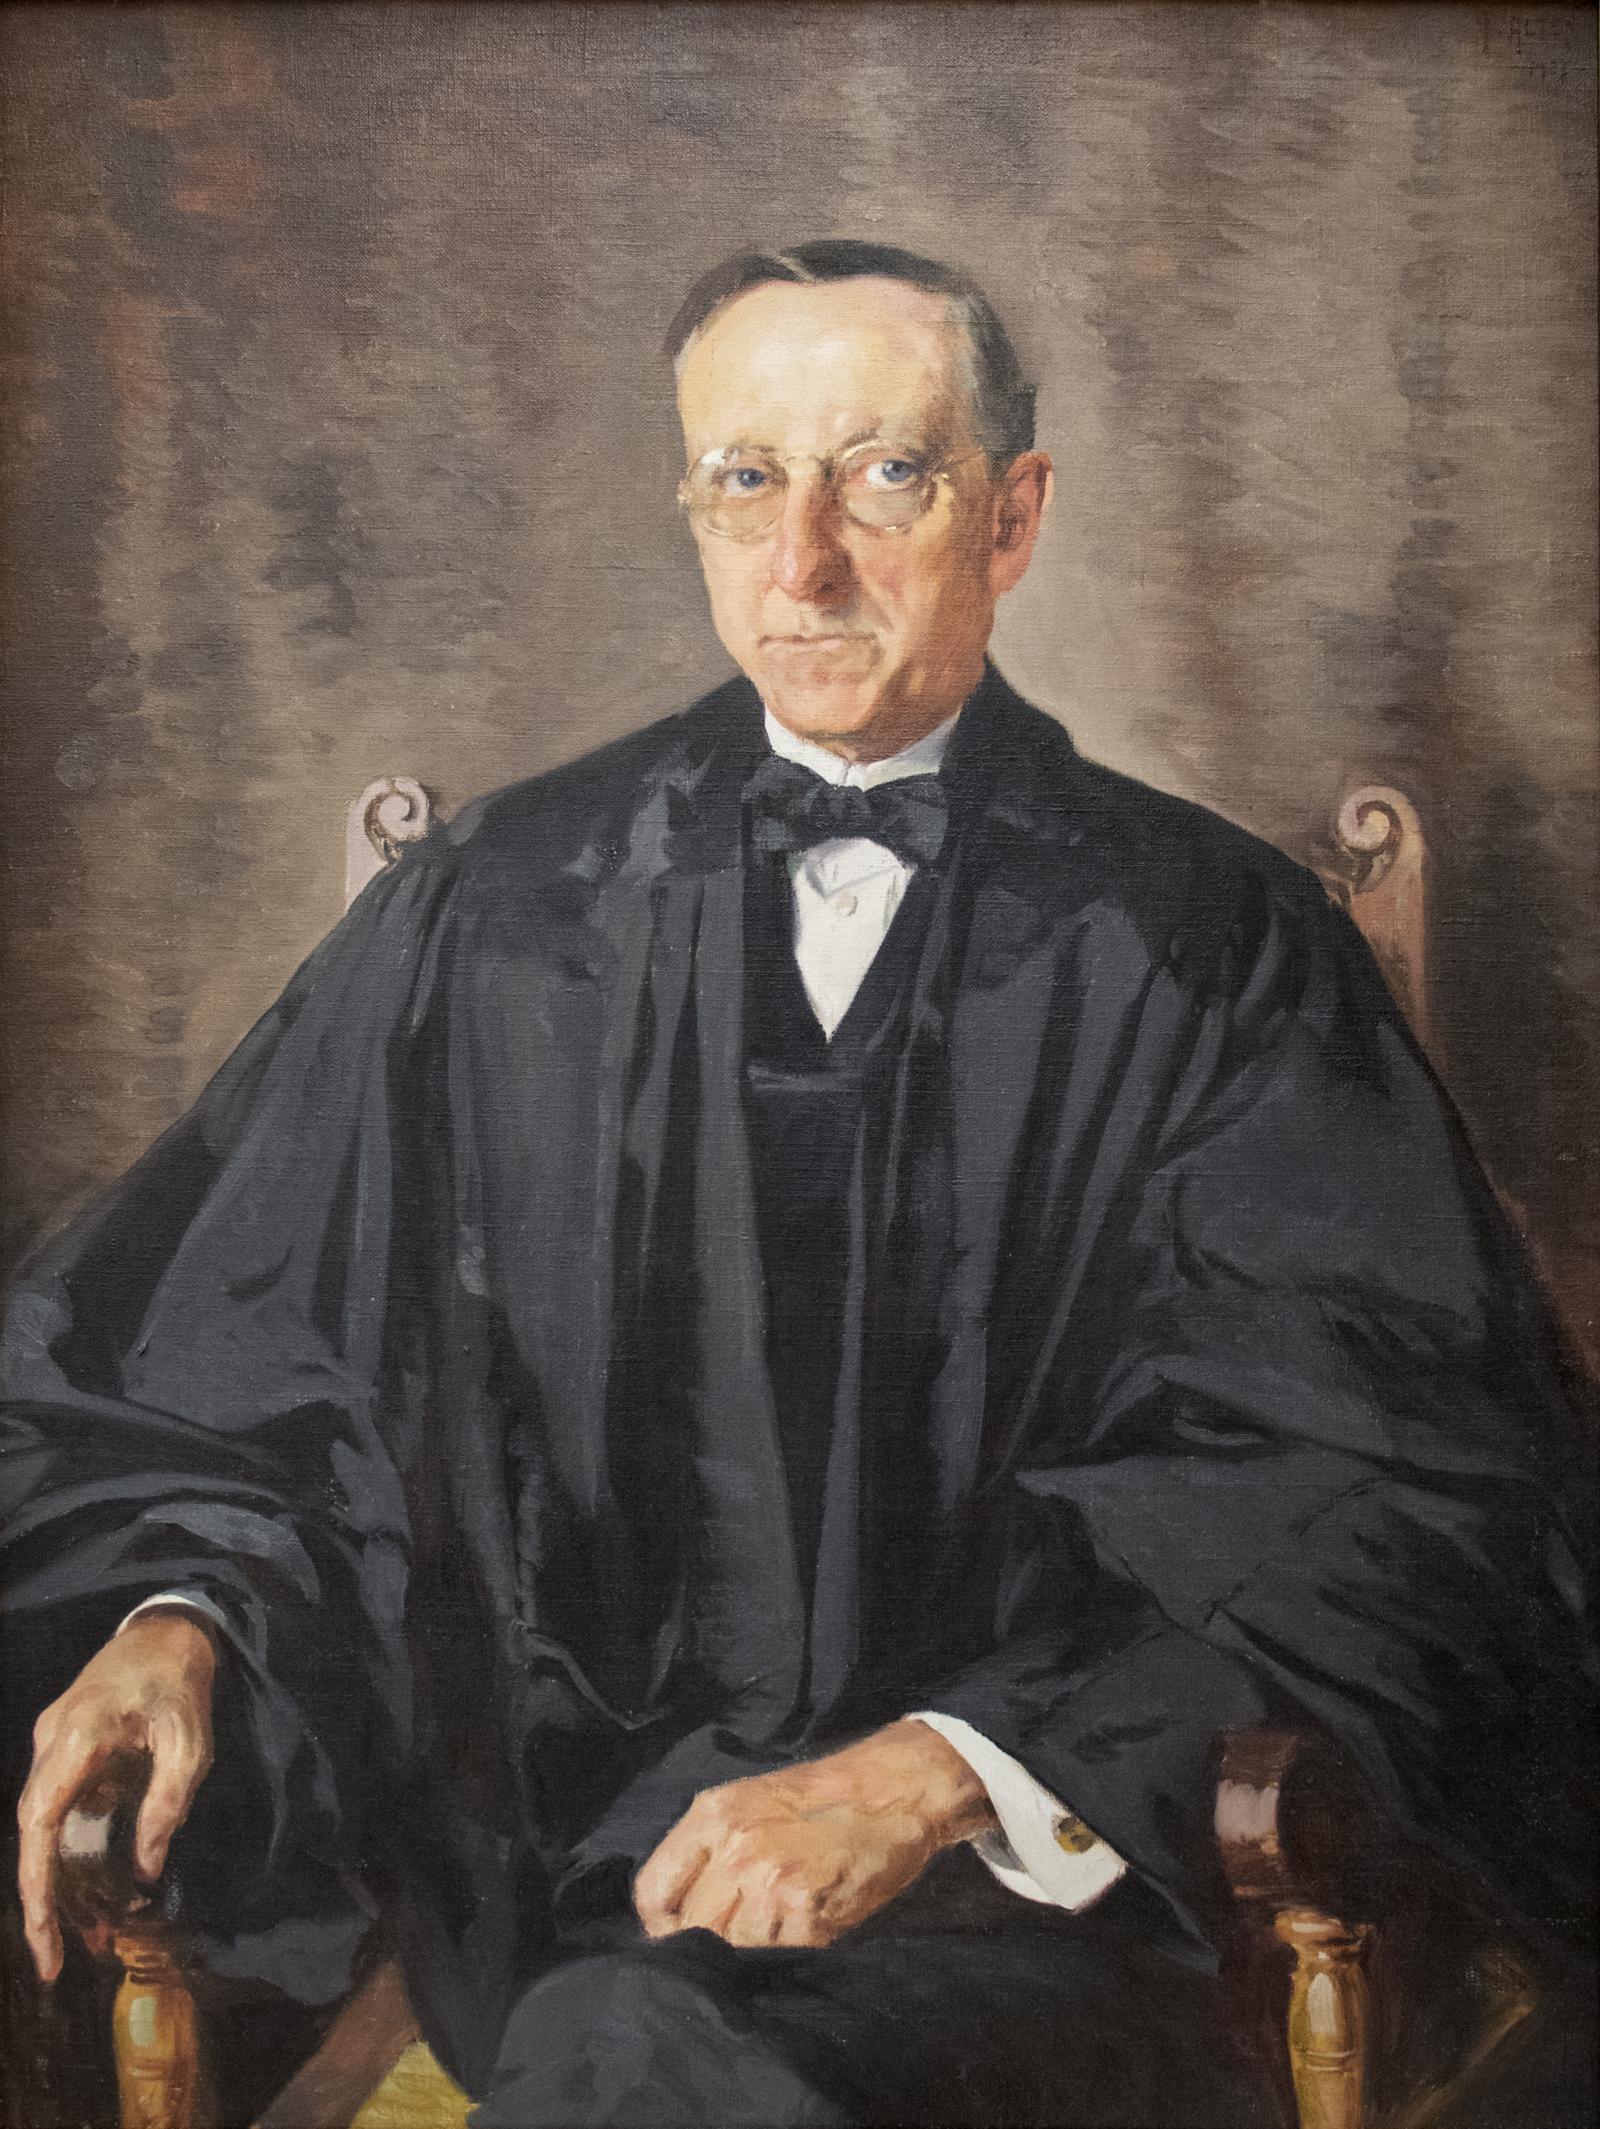 Portrait of a man with glasses seated in a wooden chair wearing black judicial robes.